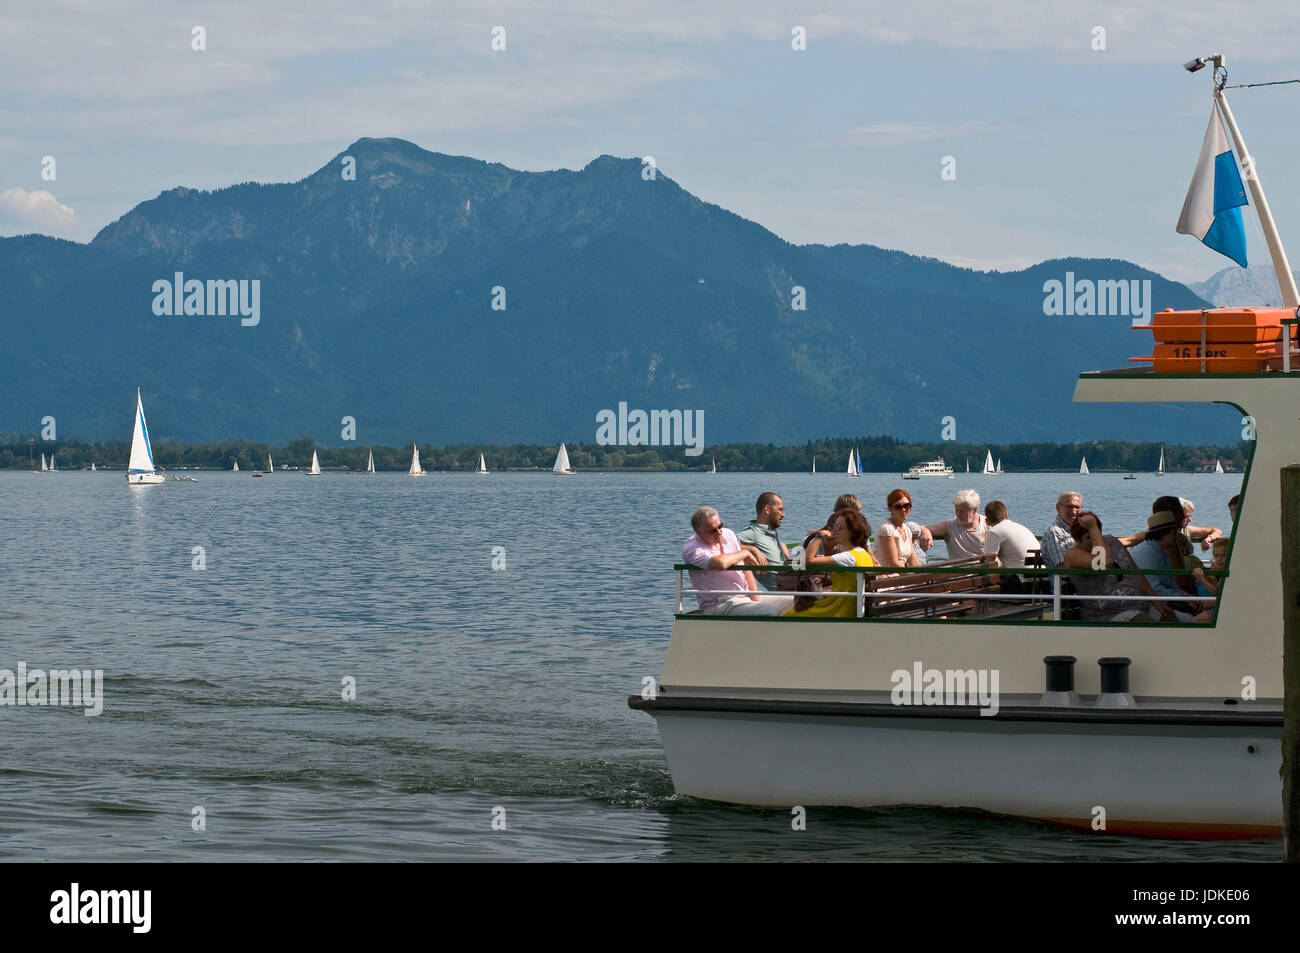 Europe, Germany, Bavaria, Lake Chiem, Chiemgau, Prien floor, look of the investor before the scenery of the Chiemgauer mountains, , Europa, Deutschlan Stock Photo